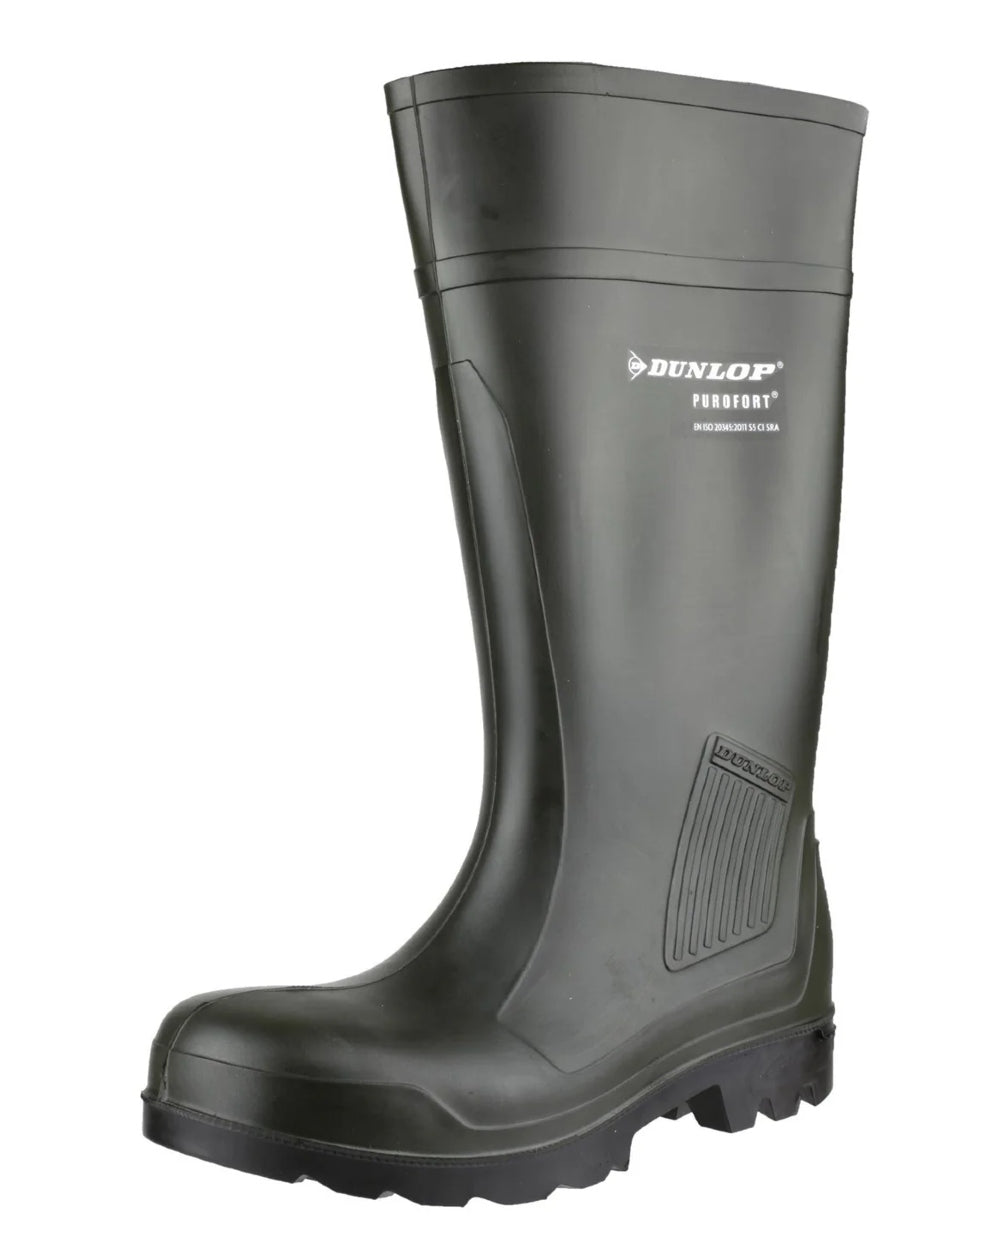 Green coloured Dunlop Purofort Professional Full Safety Wellingtons on white background 